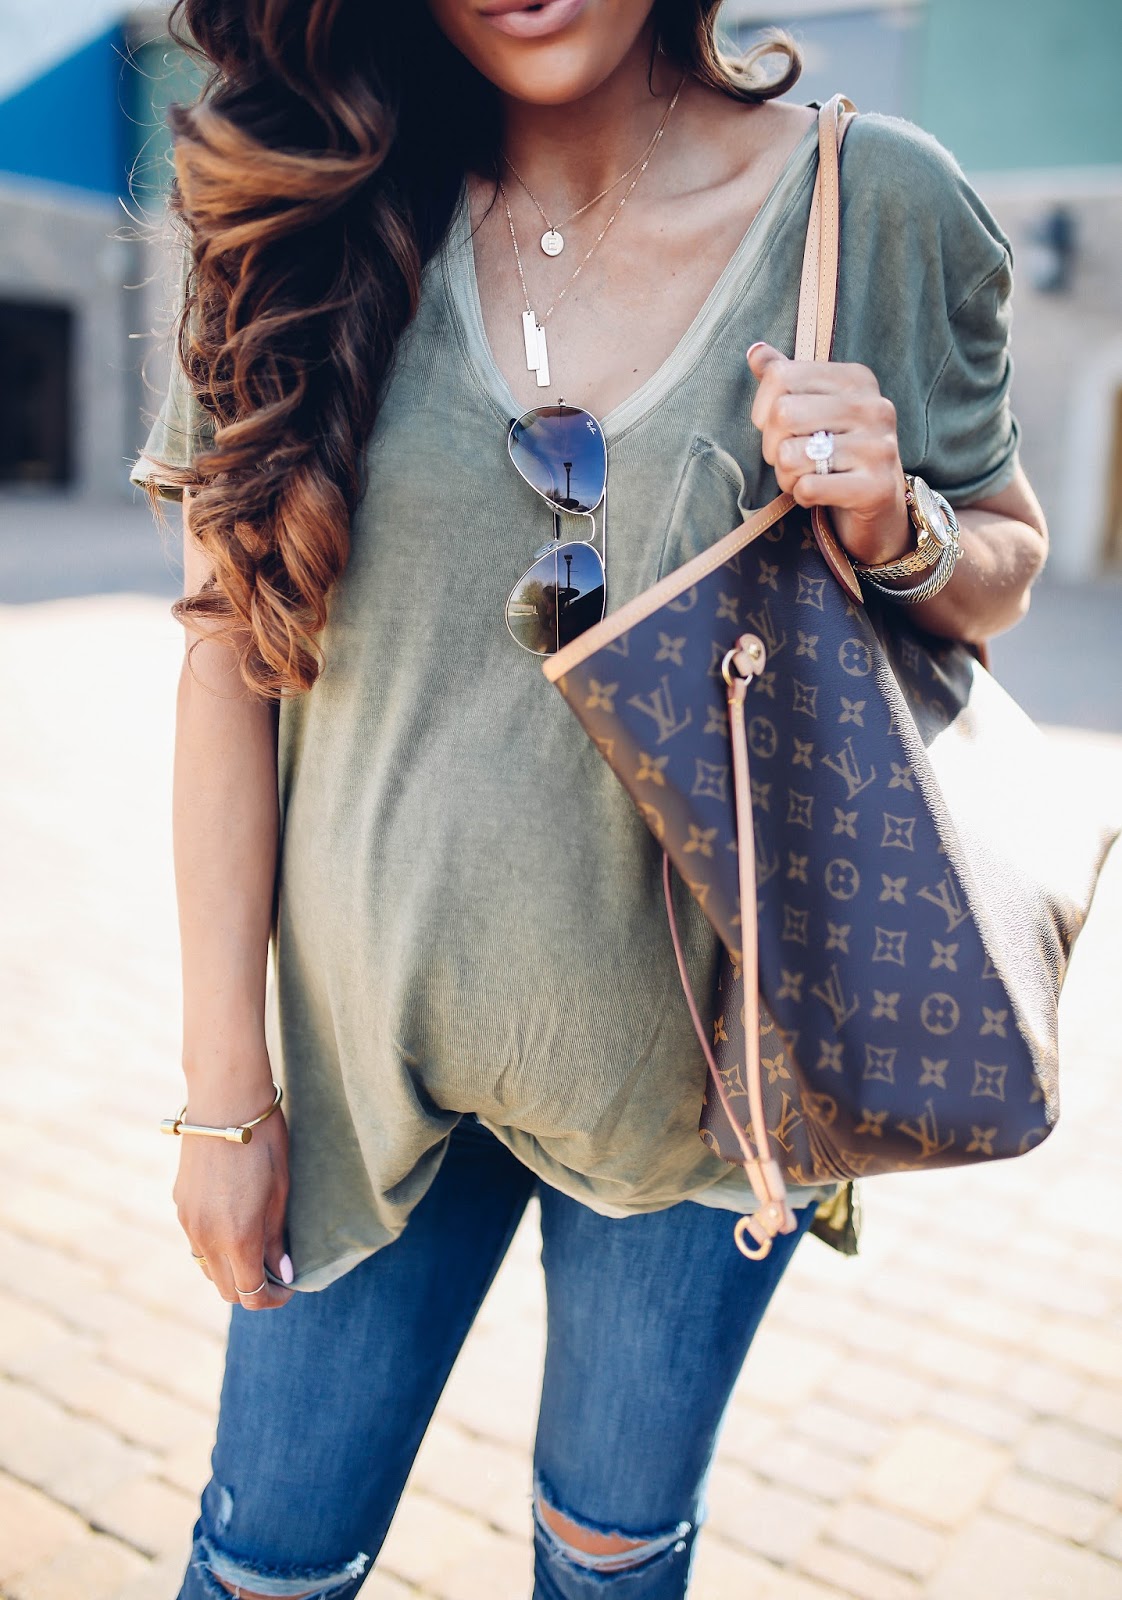 Mia Mia Mine  Neverfull outfit, Louis vuitton neverfull gm, Vuitton outfit